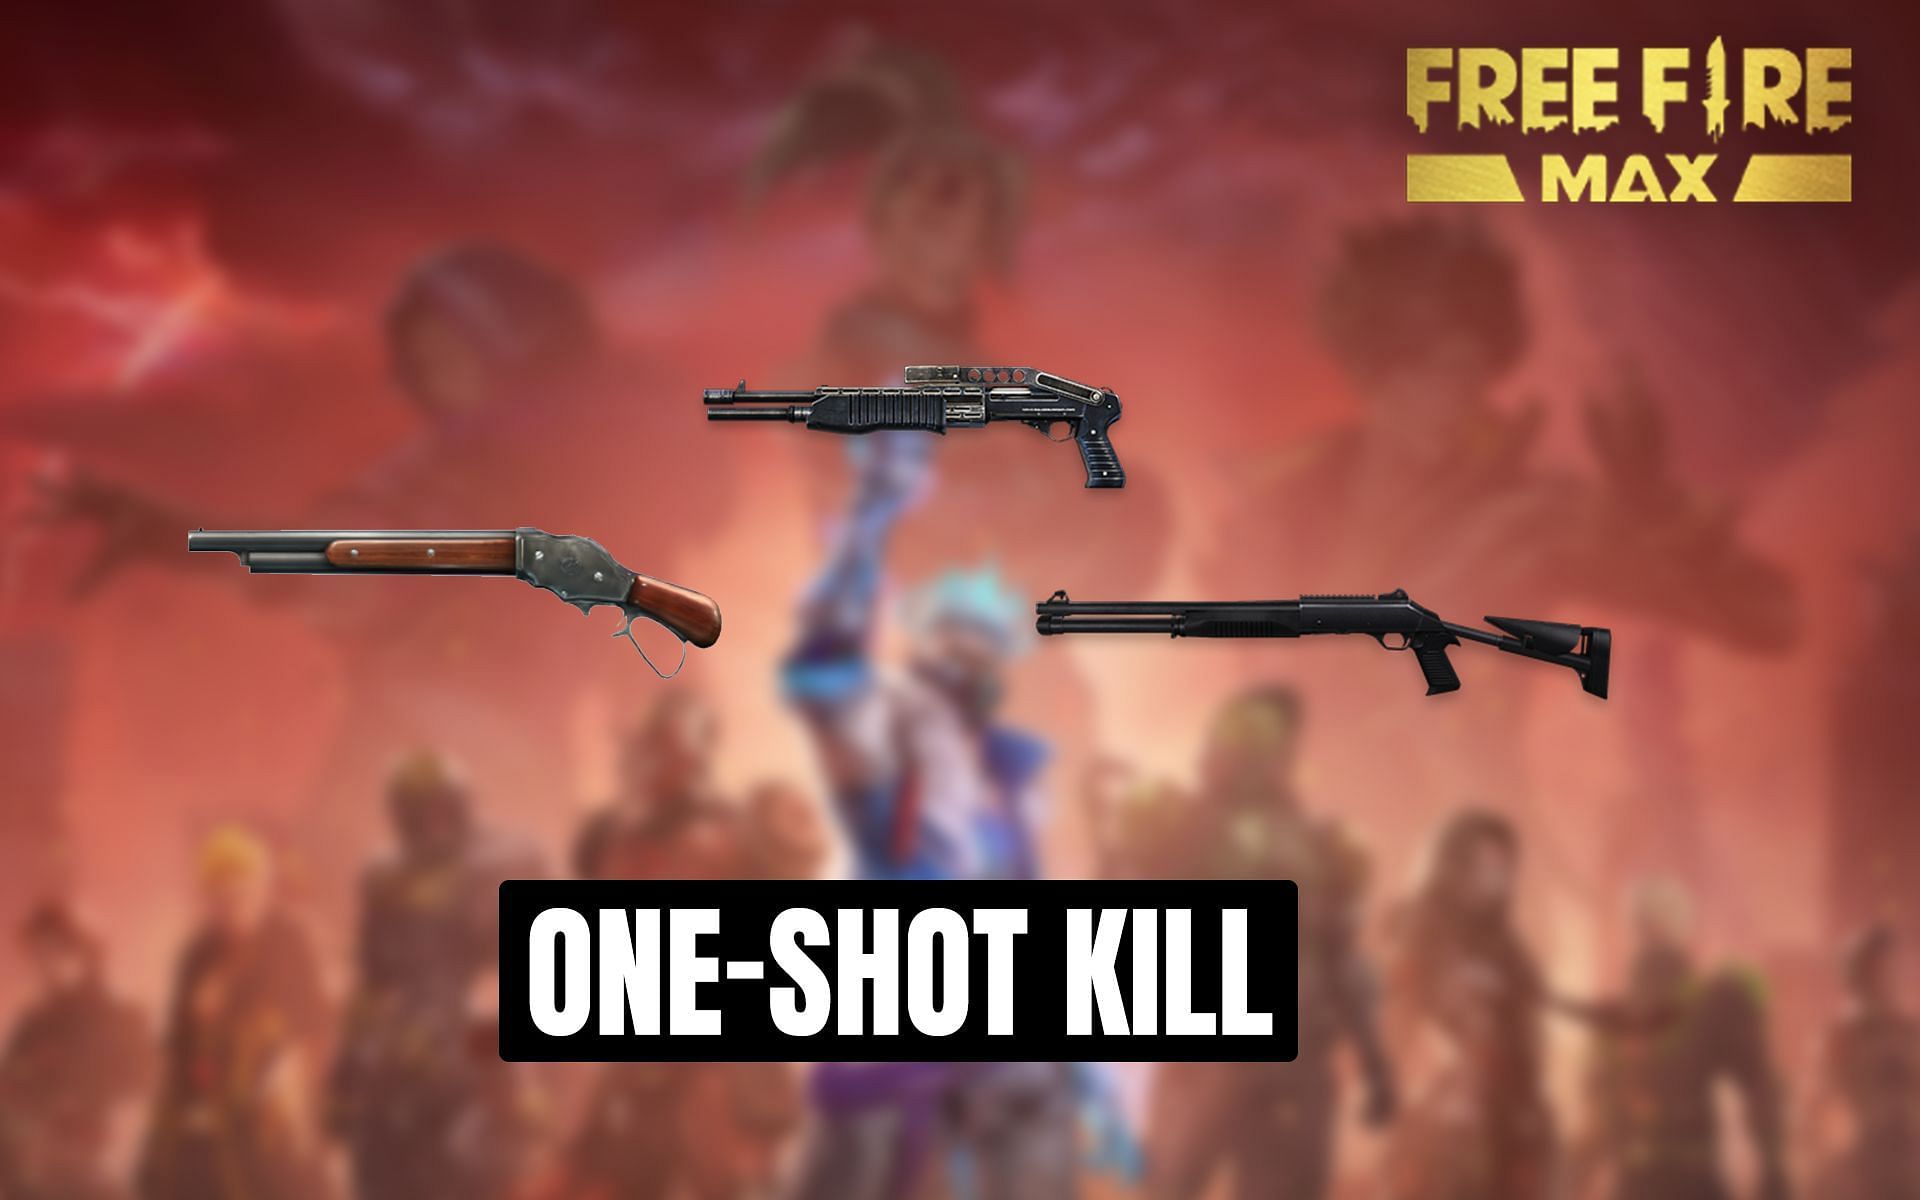 Free Fire MAX features a wide range of weapons in the game (Image via Sportskeeda)